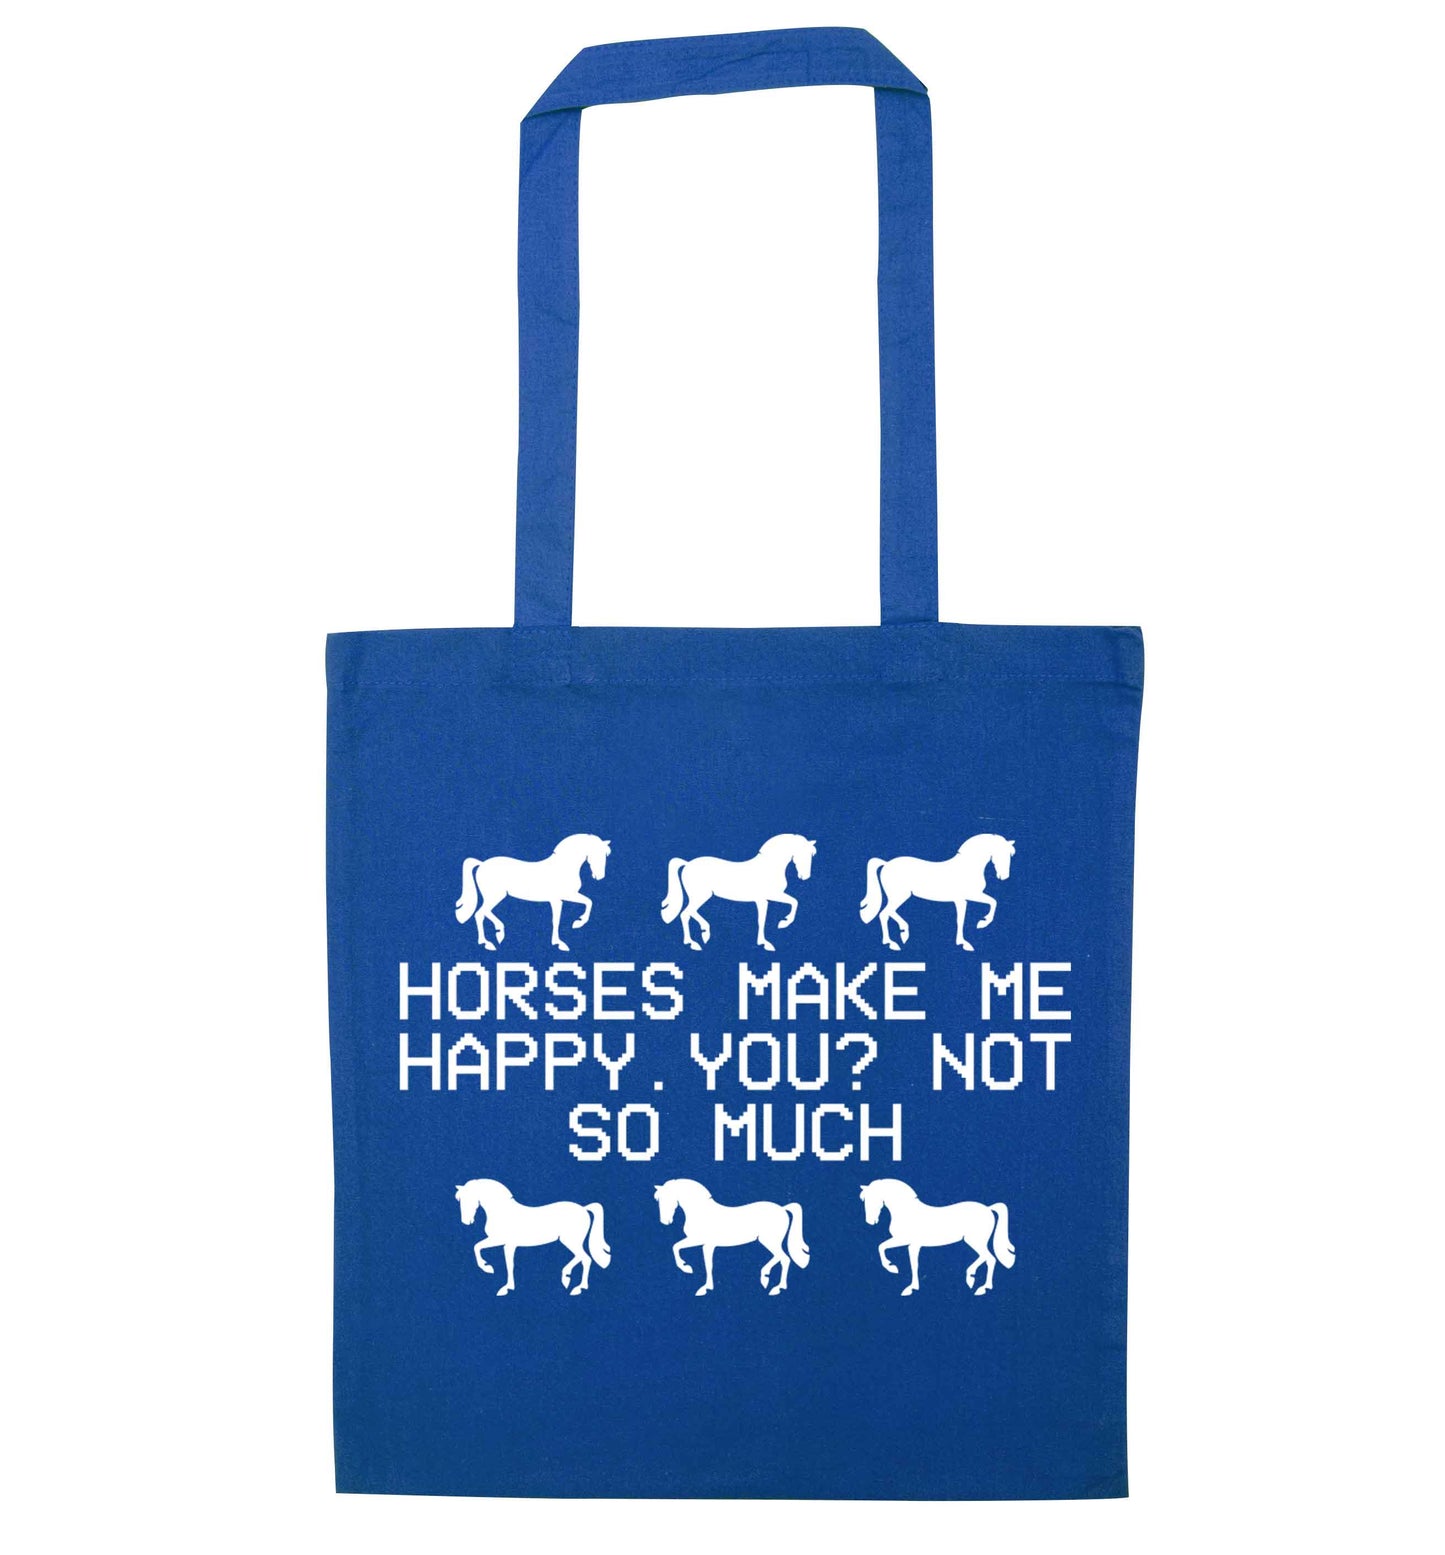 Horses make me happy, you not so much blue tote bag